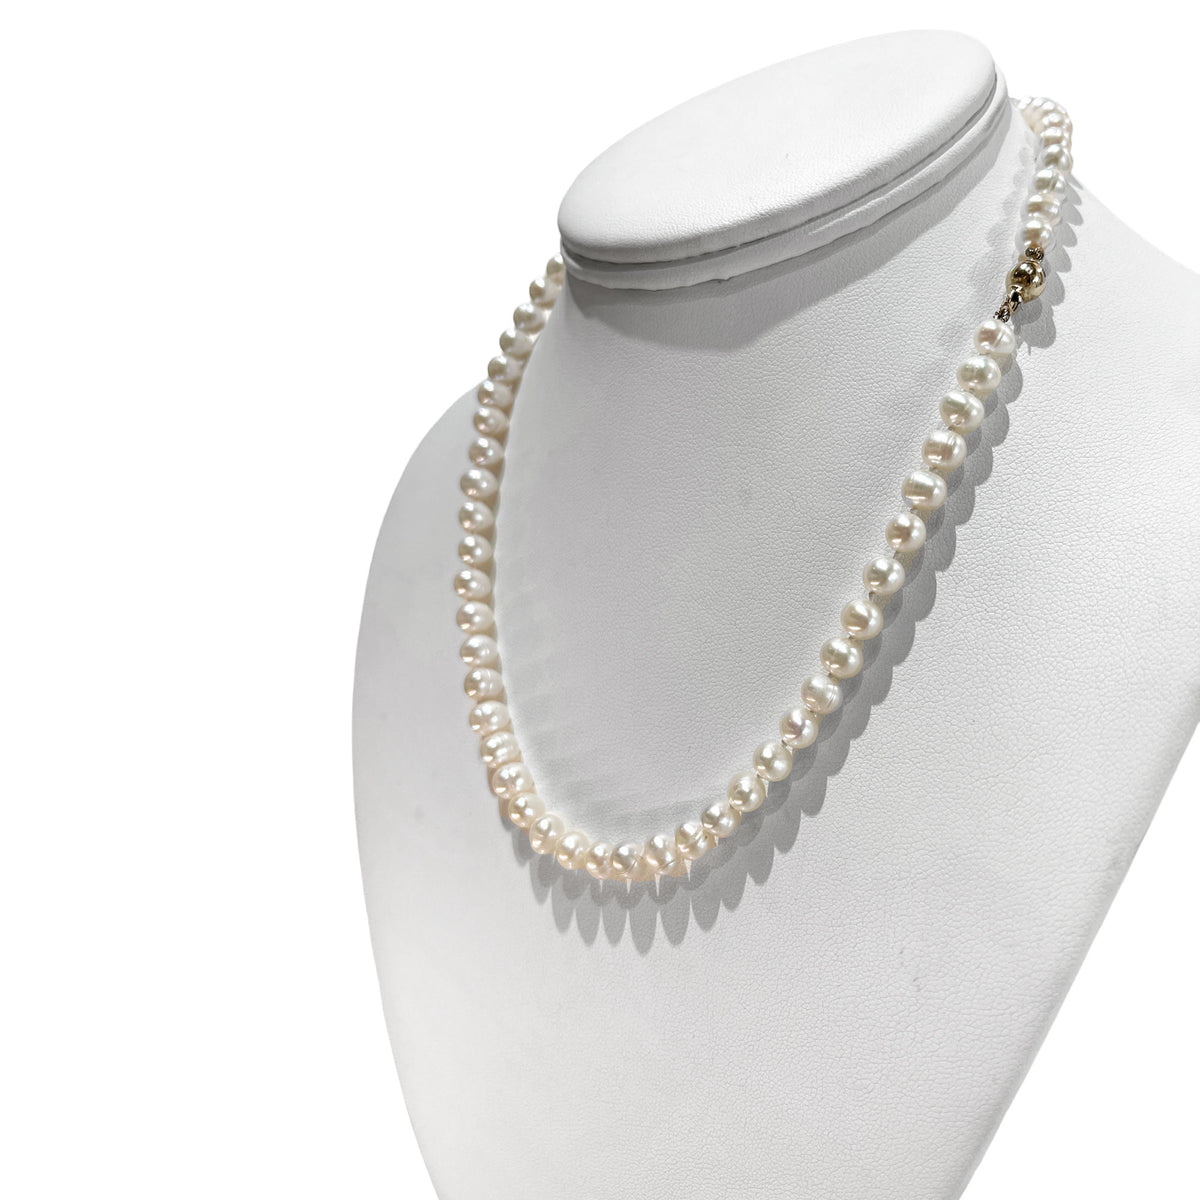 White Ringed Freshwater Cultured Pearl Necklace and Bracelet Set